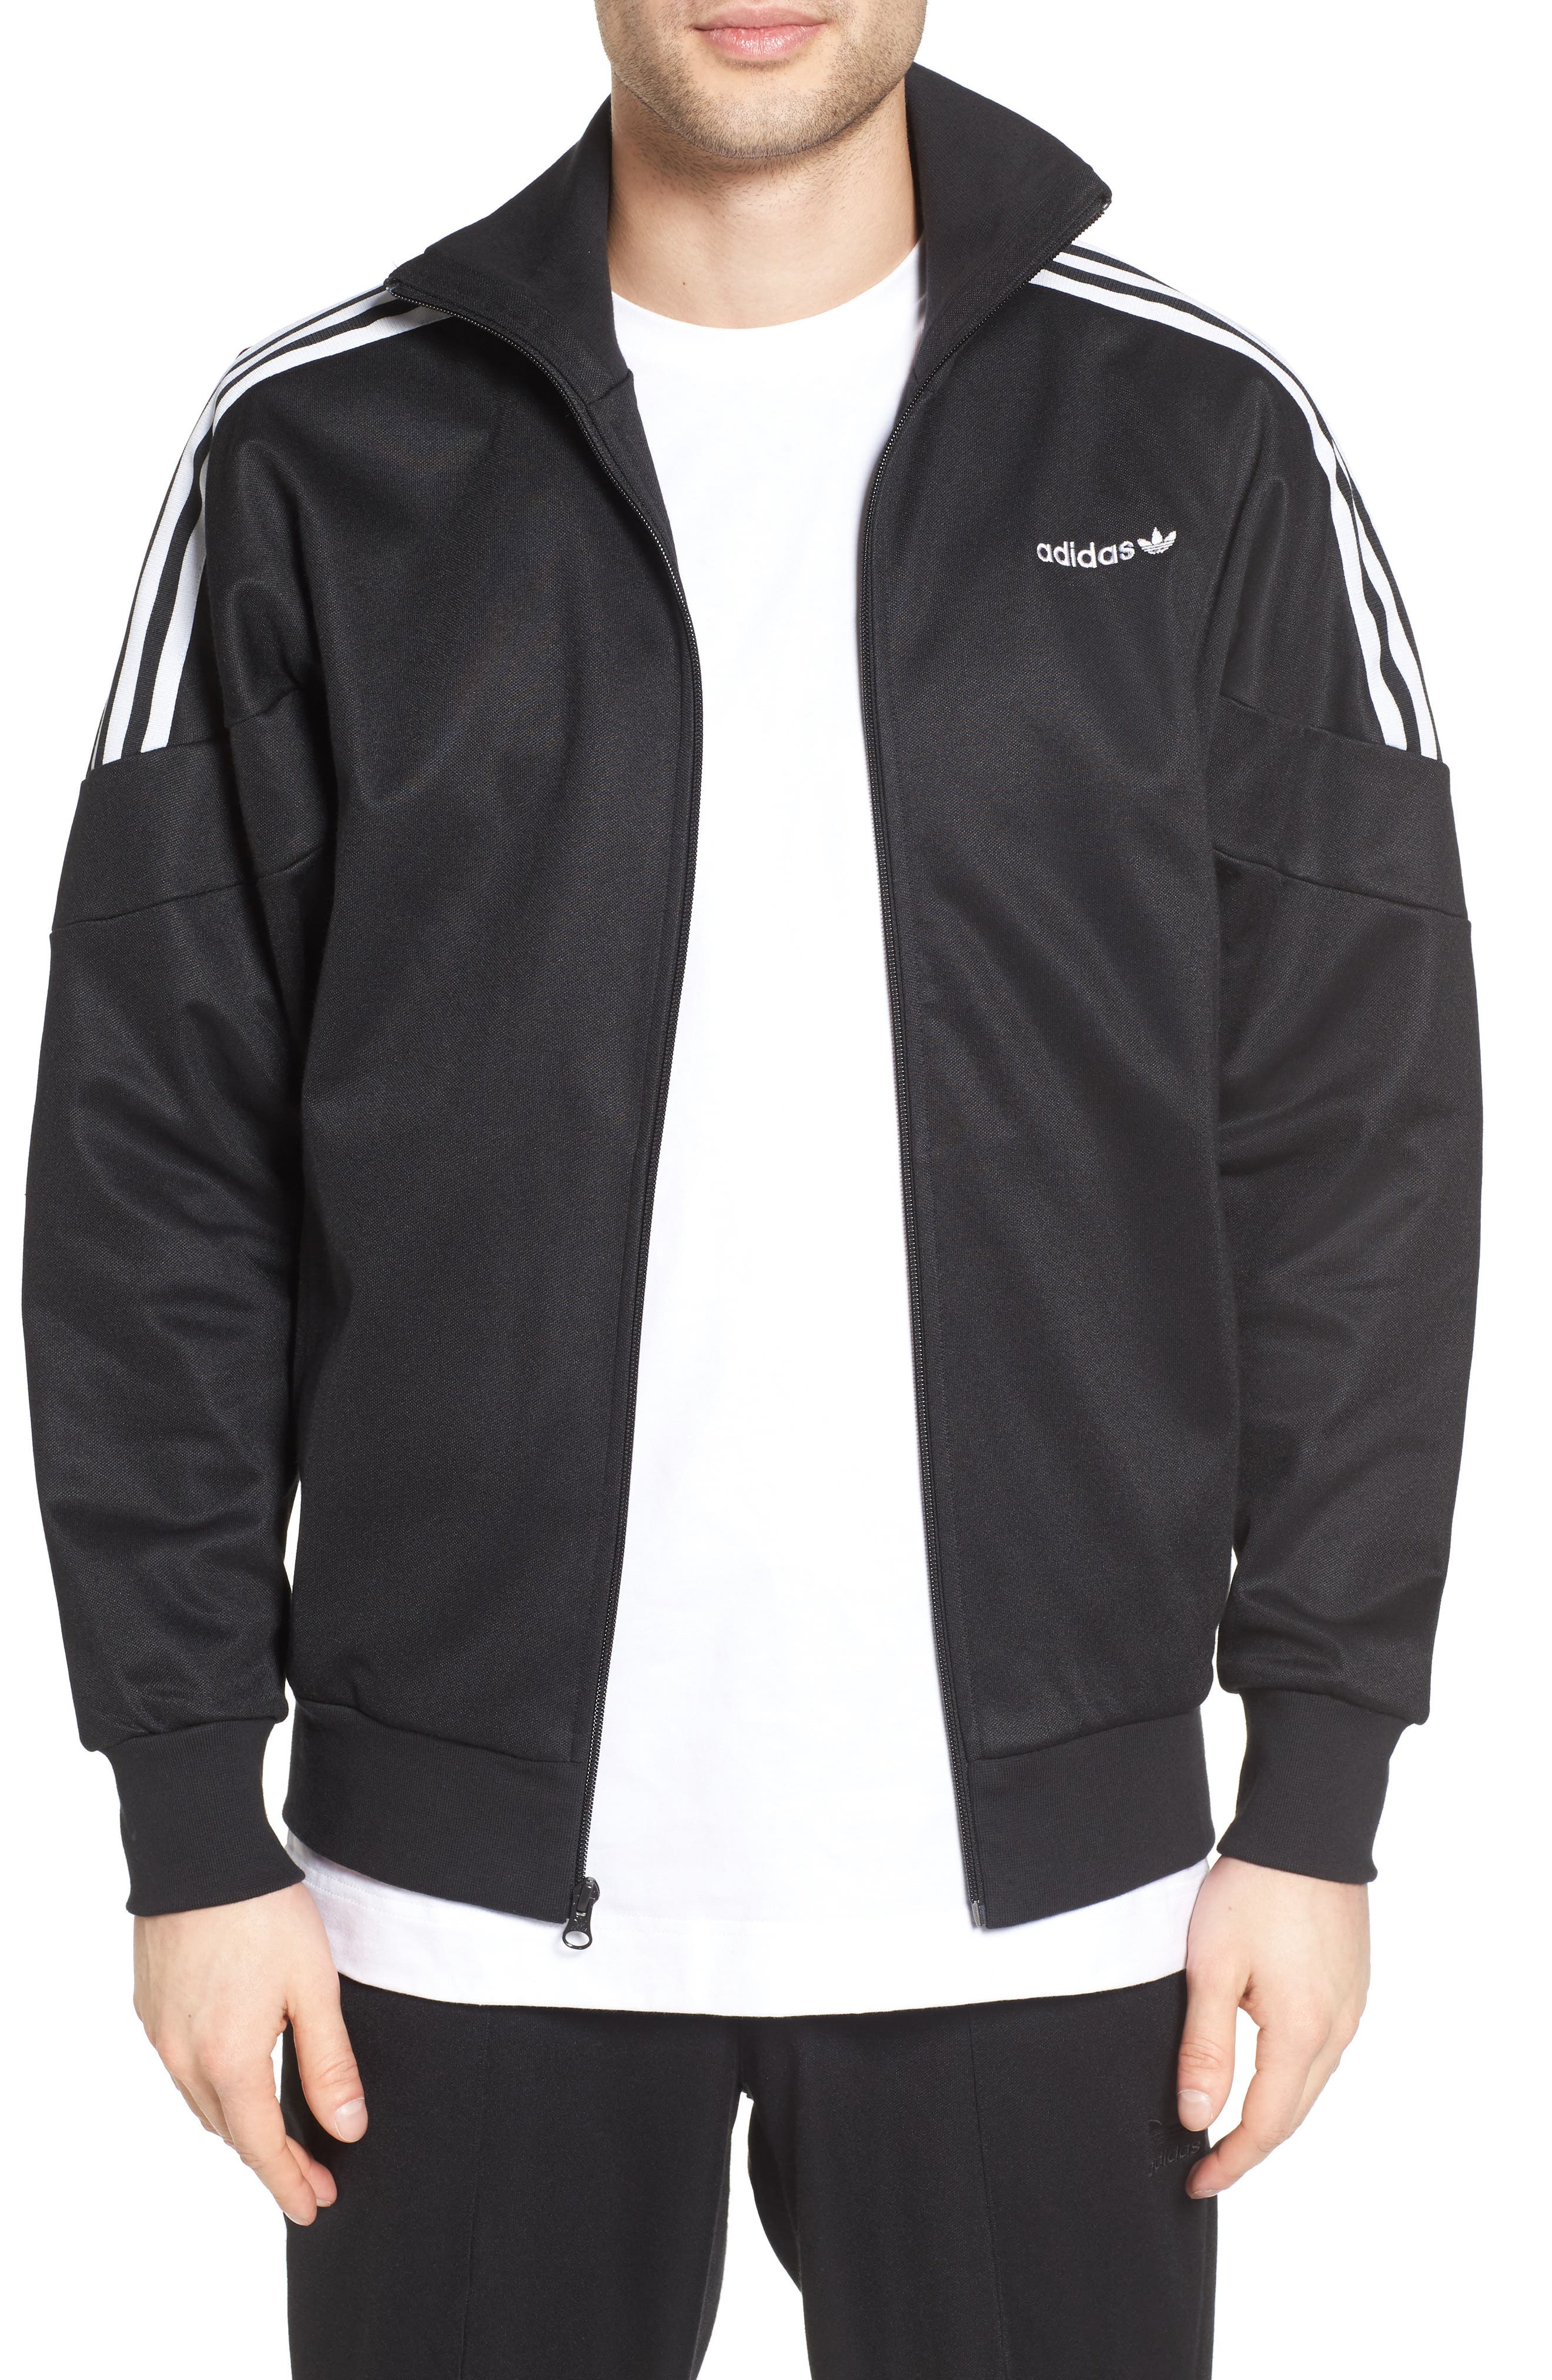 adidas challenger track top